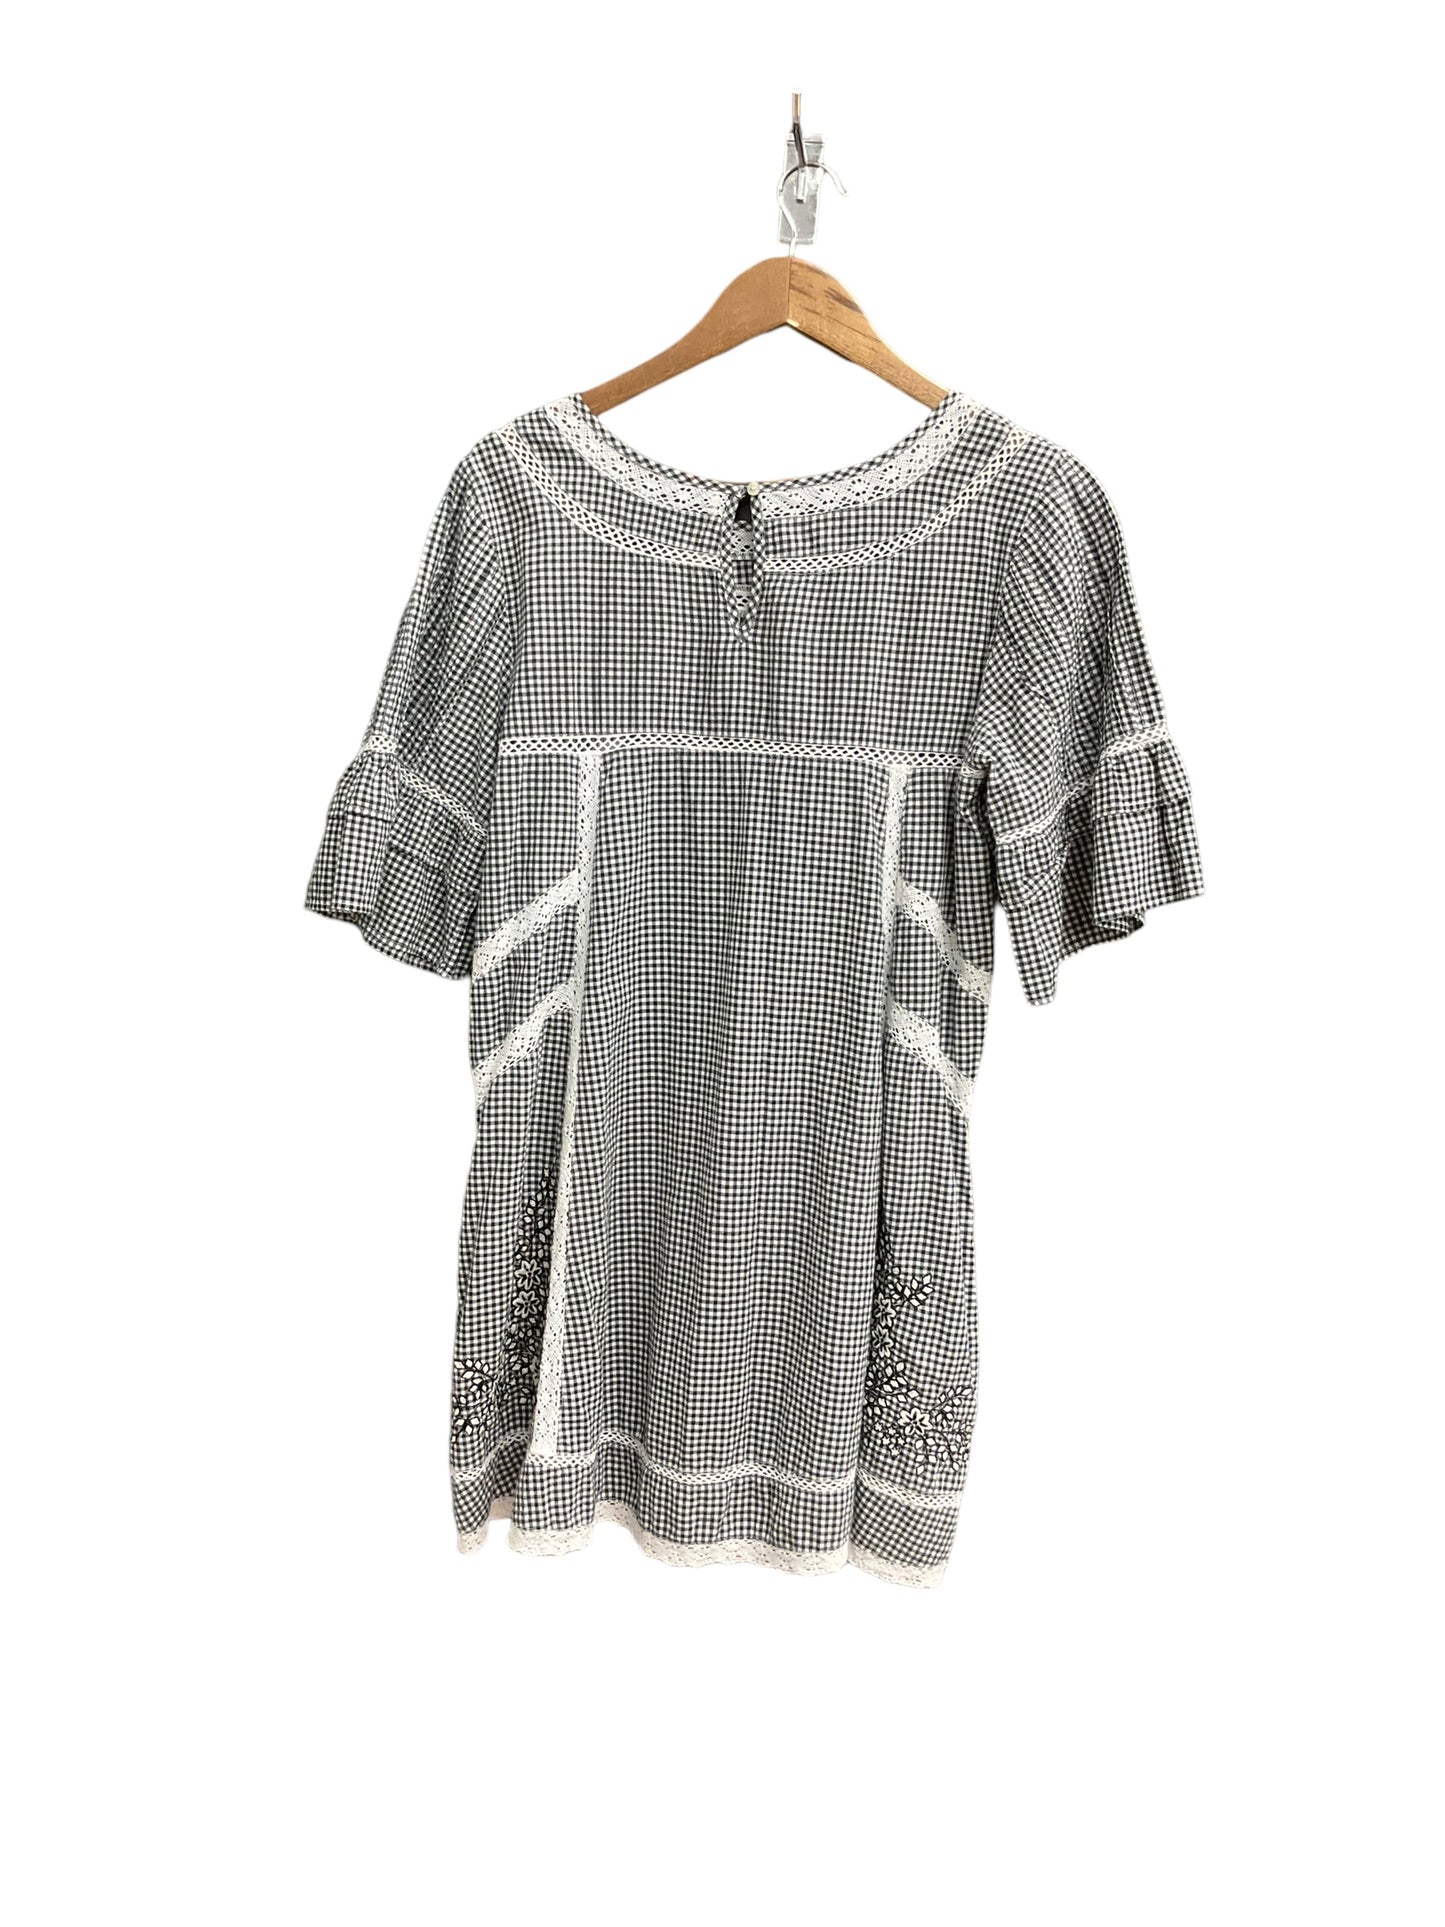 Tunic Short Sleeve By Free People  Size: M